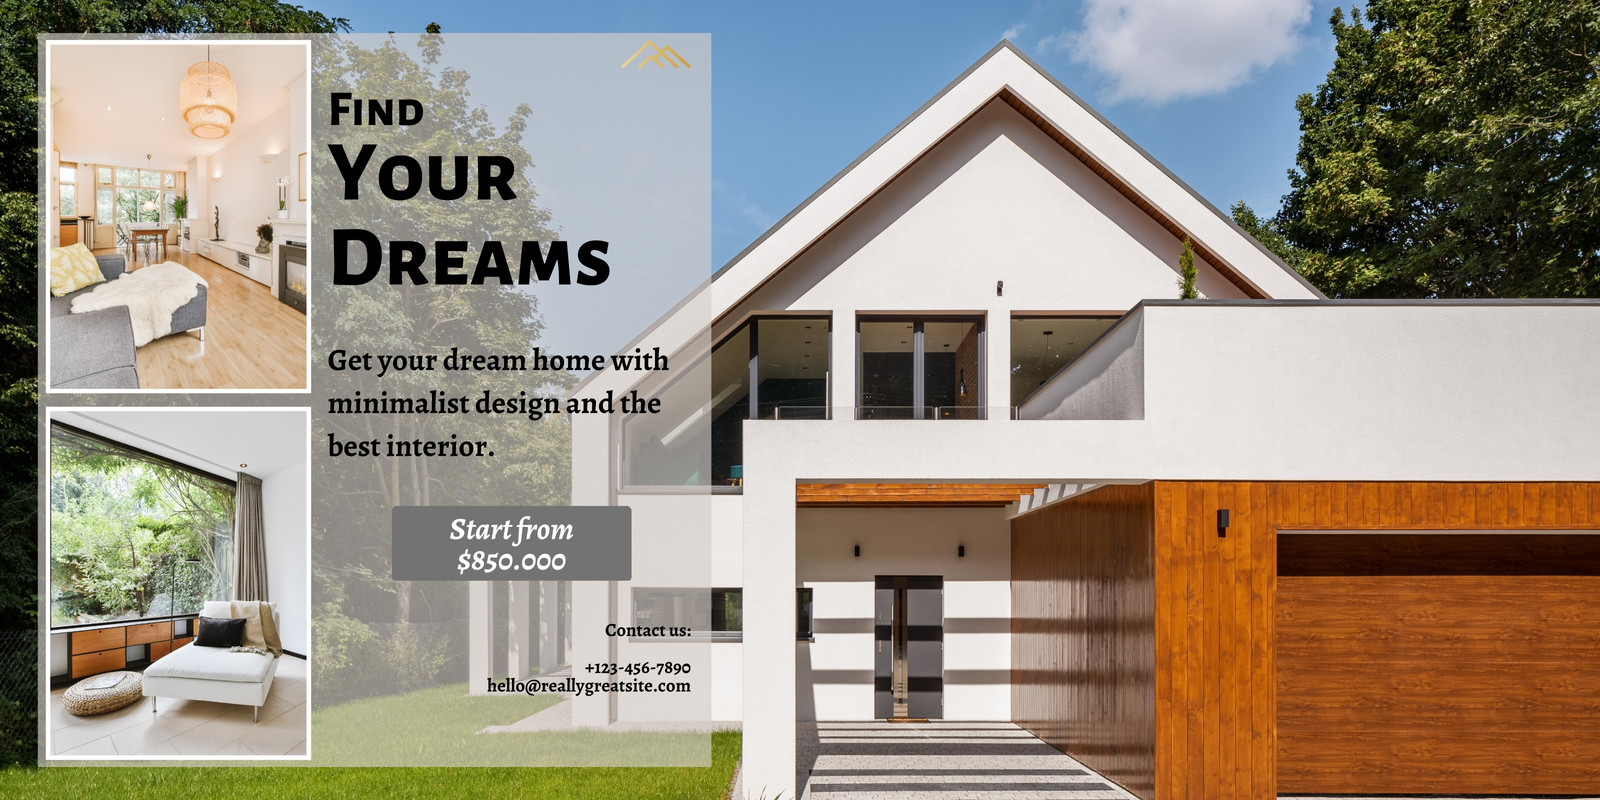 Free and customizable house templates